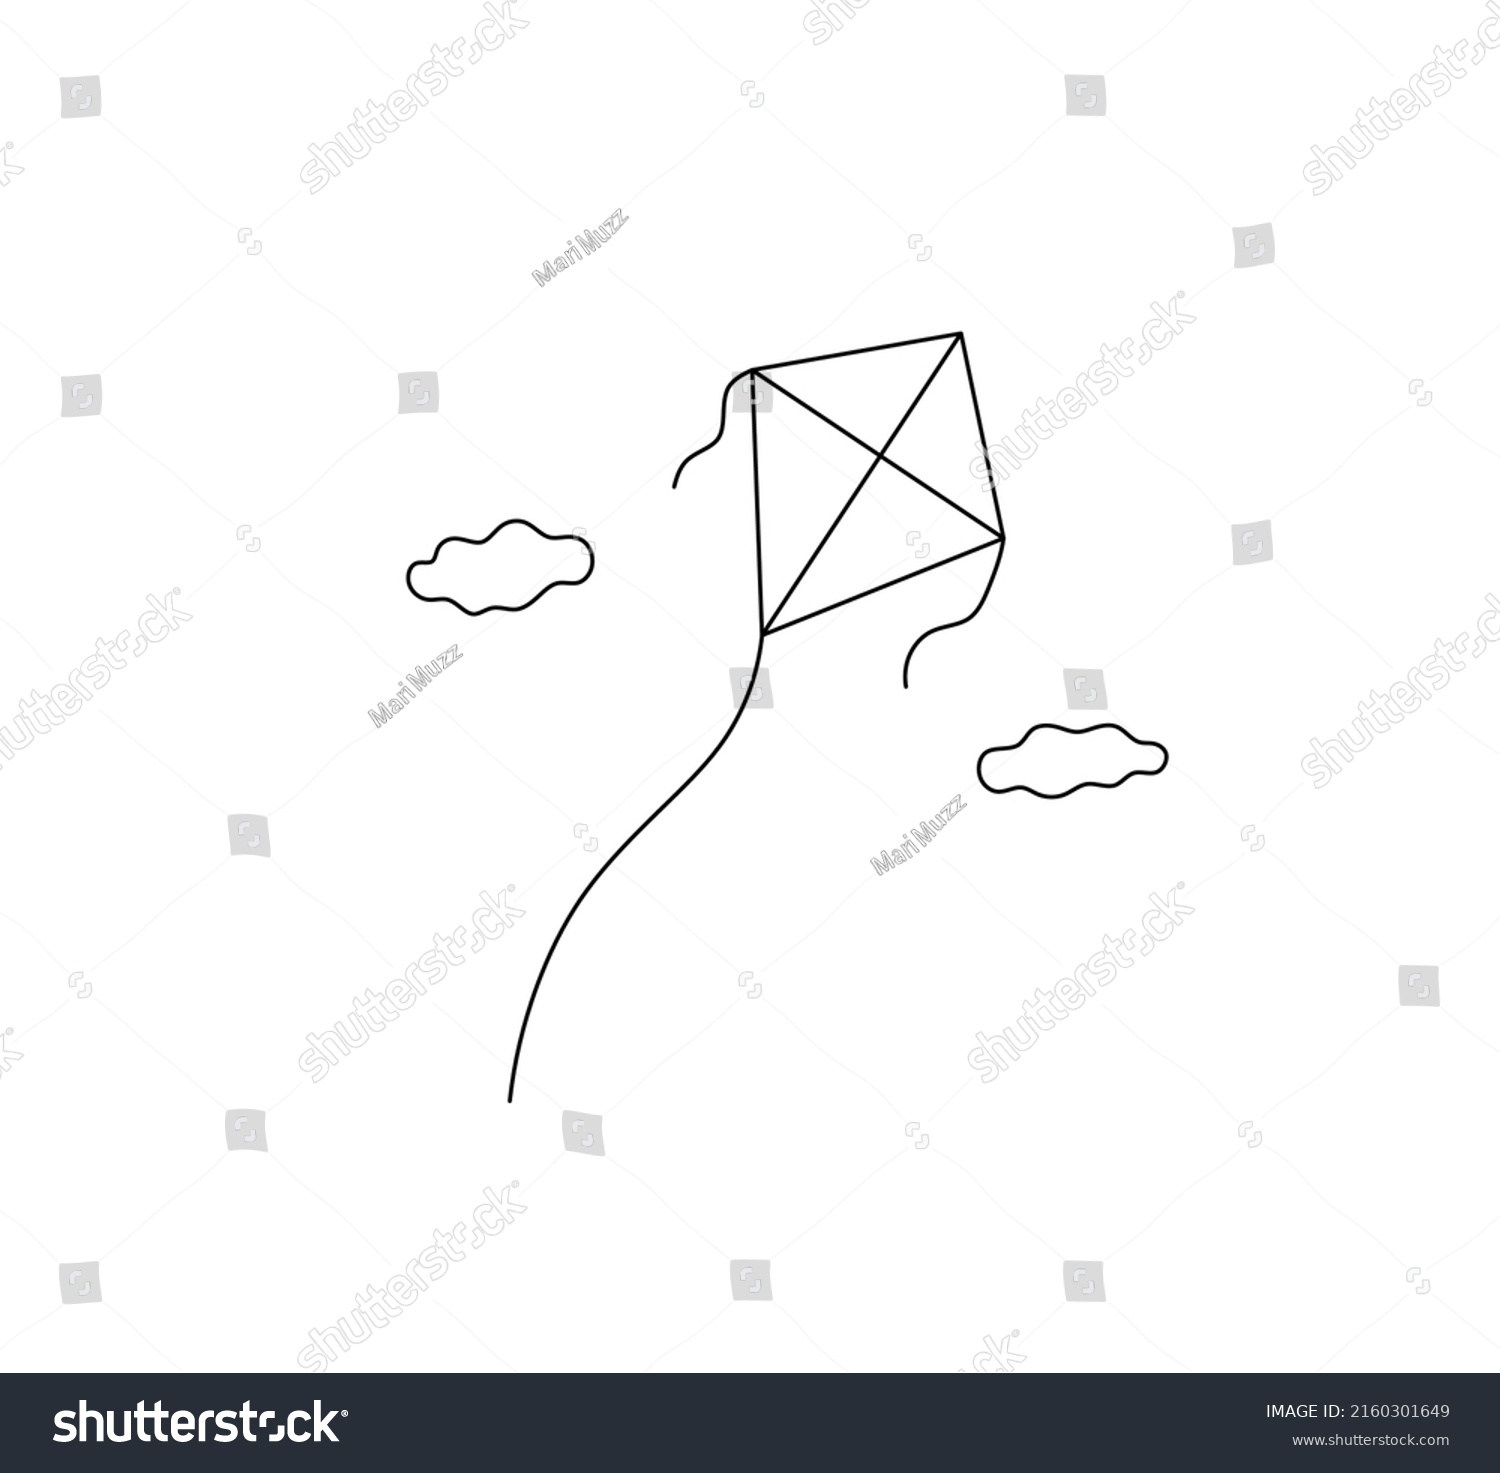 SVG of Vector isolated rhombus kite flying  in the clouds colorless black and white contour line drawing svg